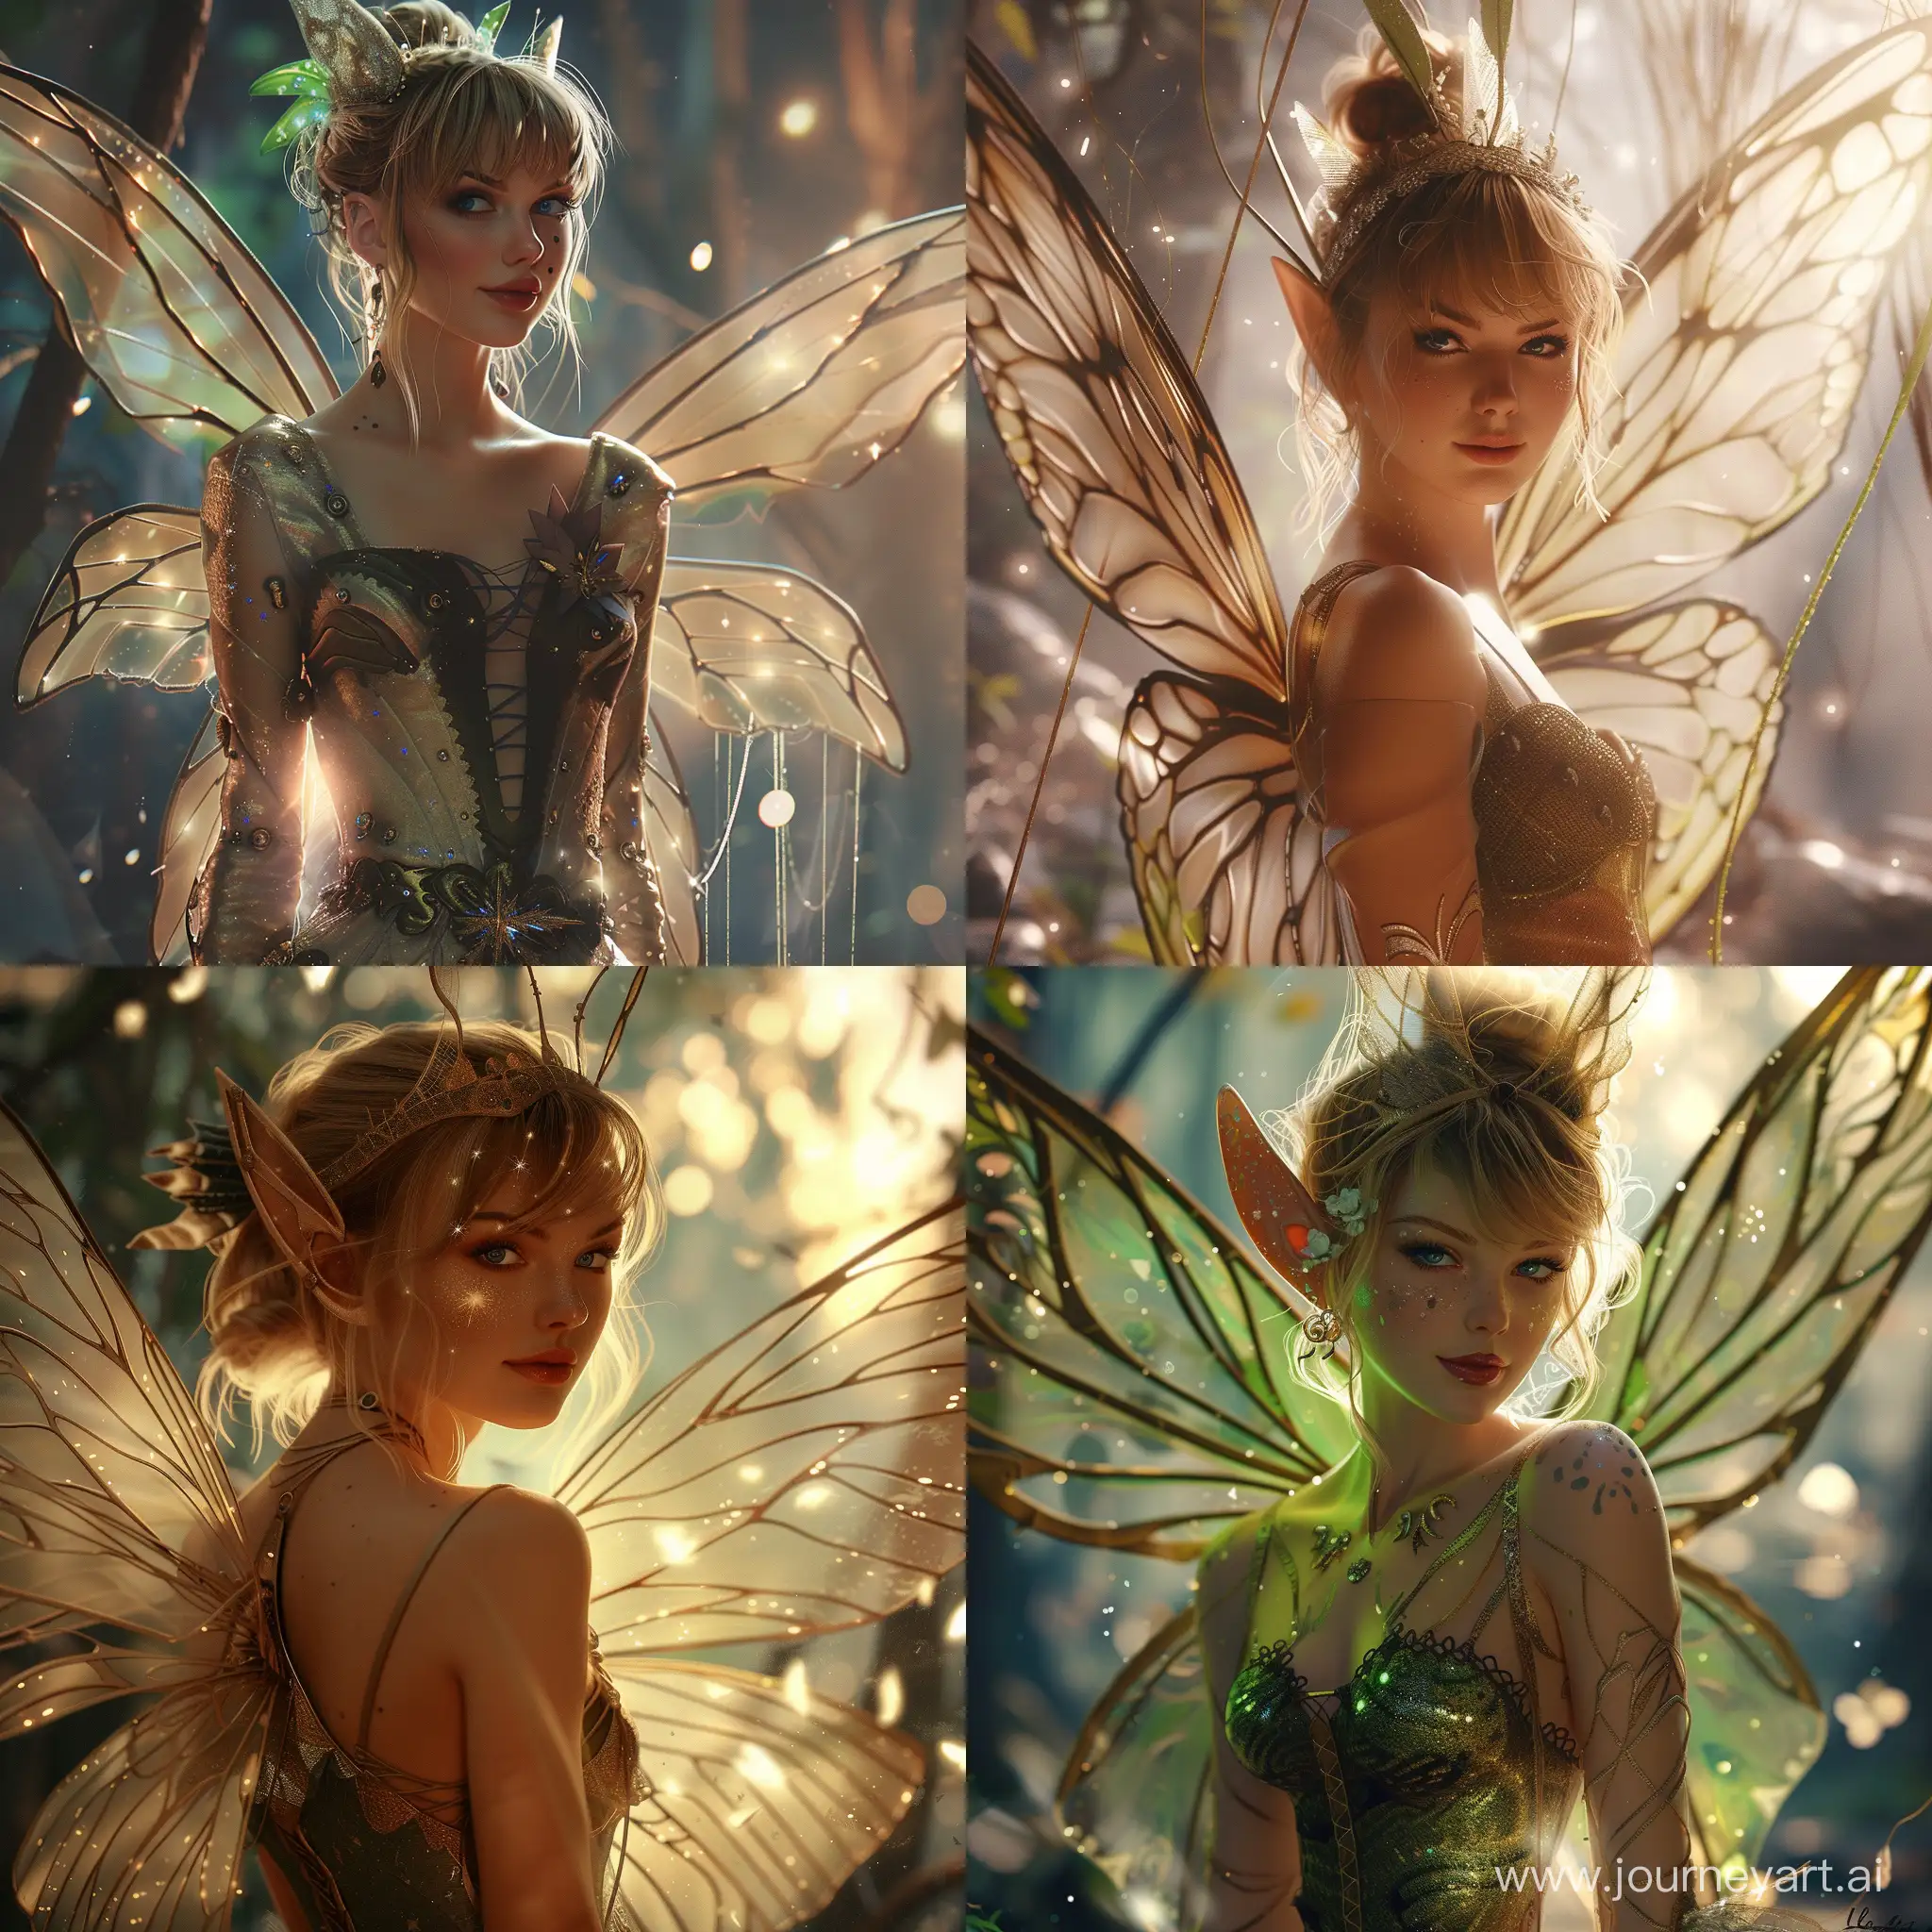 Dreamy-Digital-Painting-of-Taylor-Swift-as-Tinkerbell-with-Intricate-Details